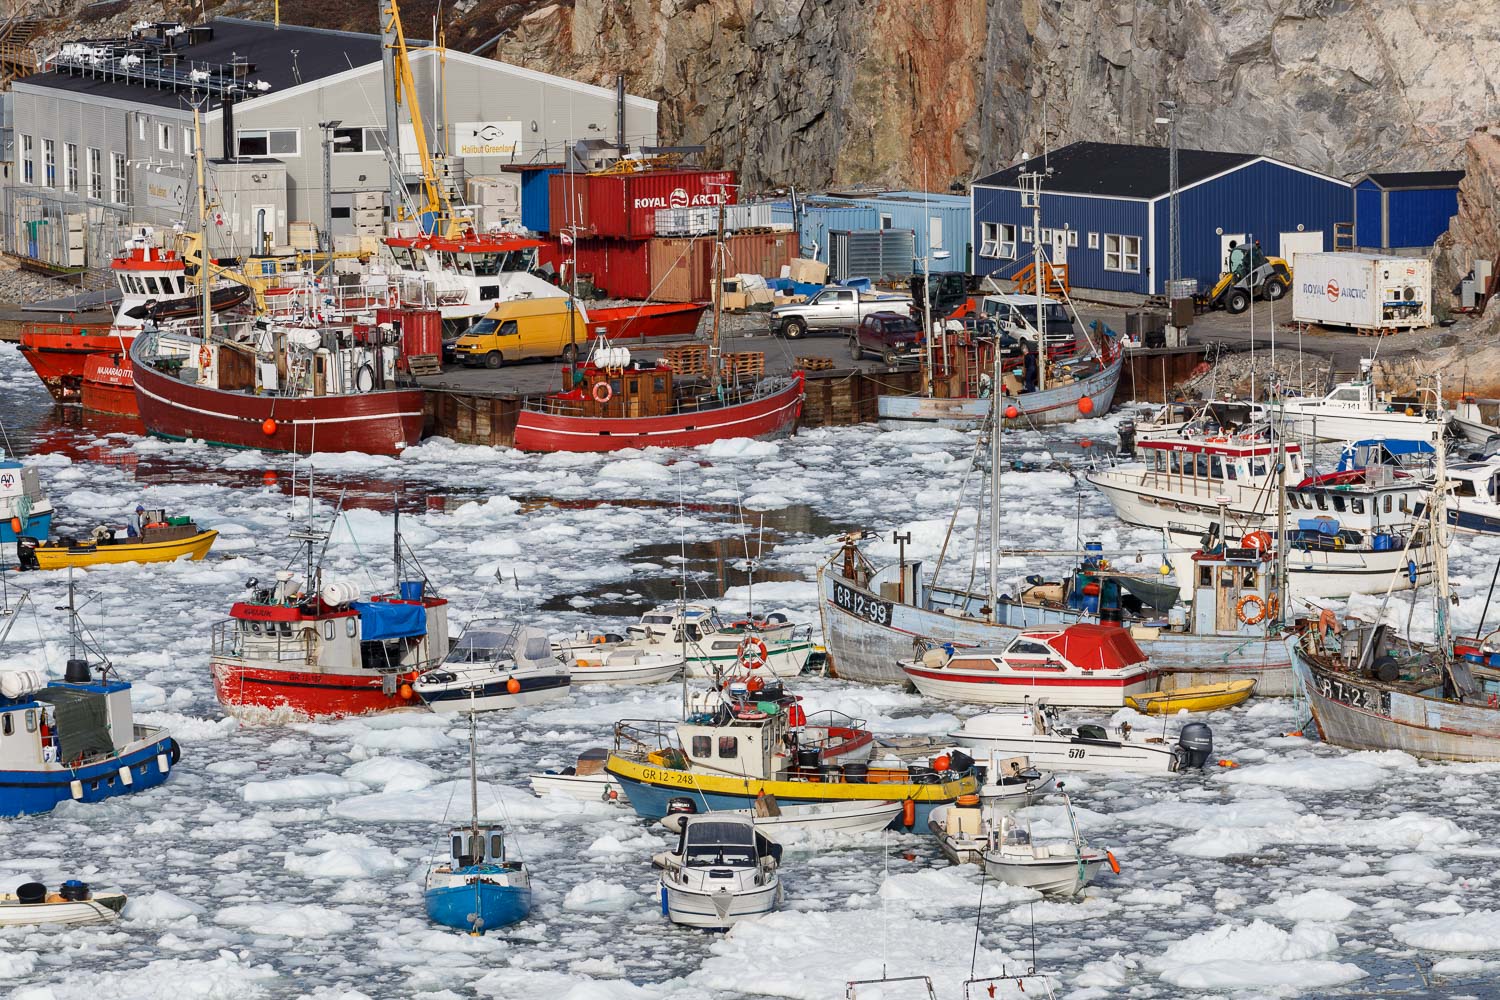 Boats in the Harbour, Ilulissat